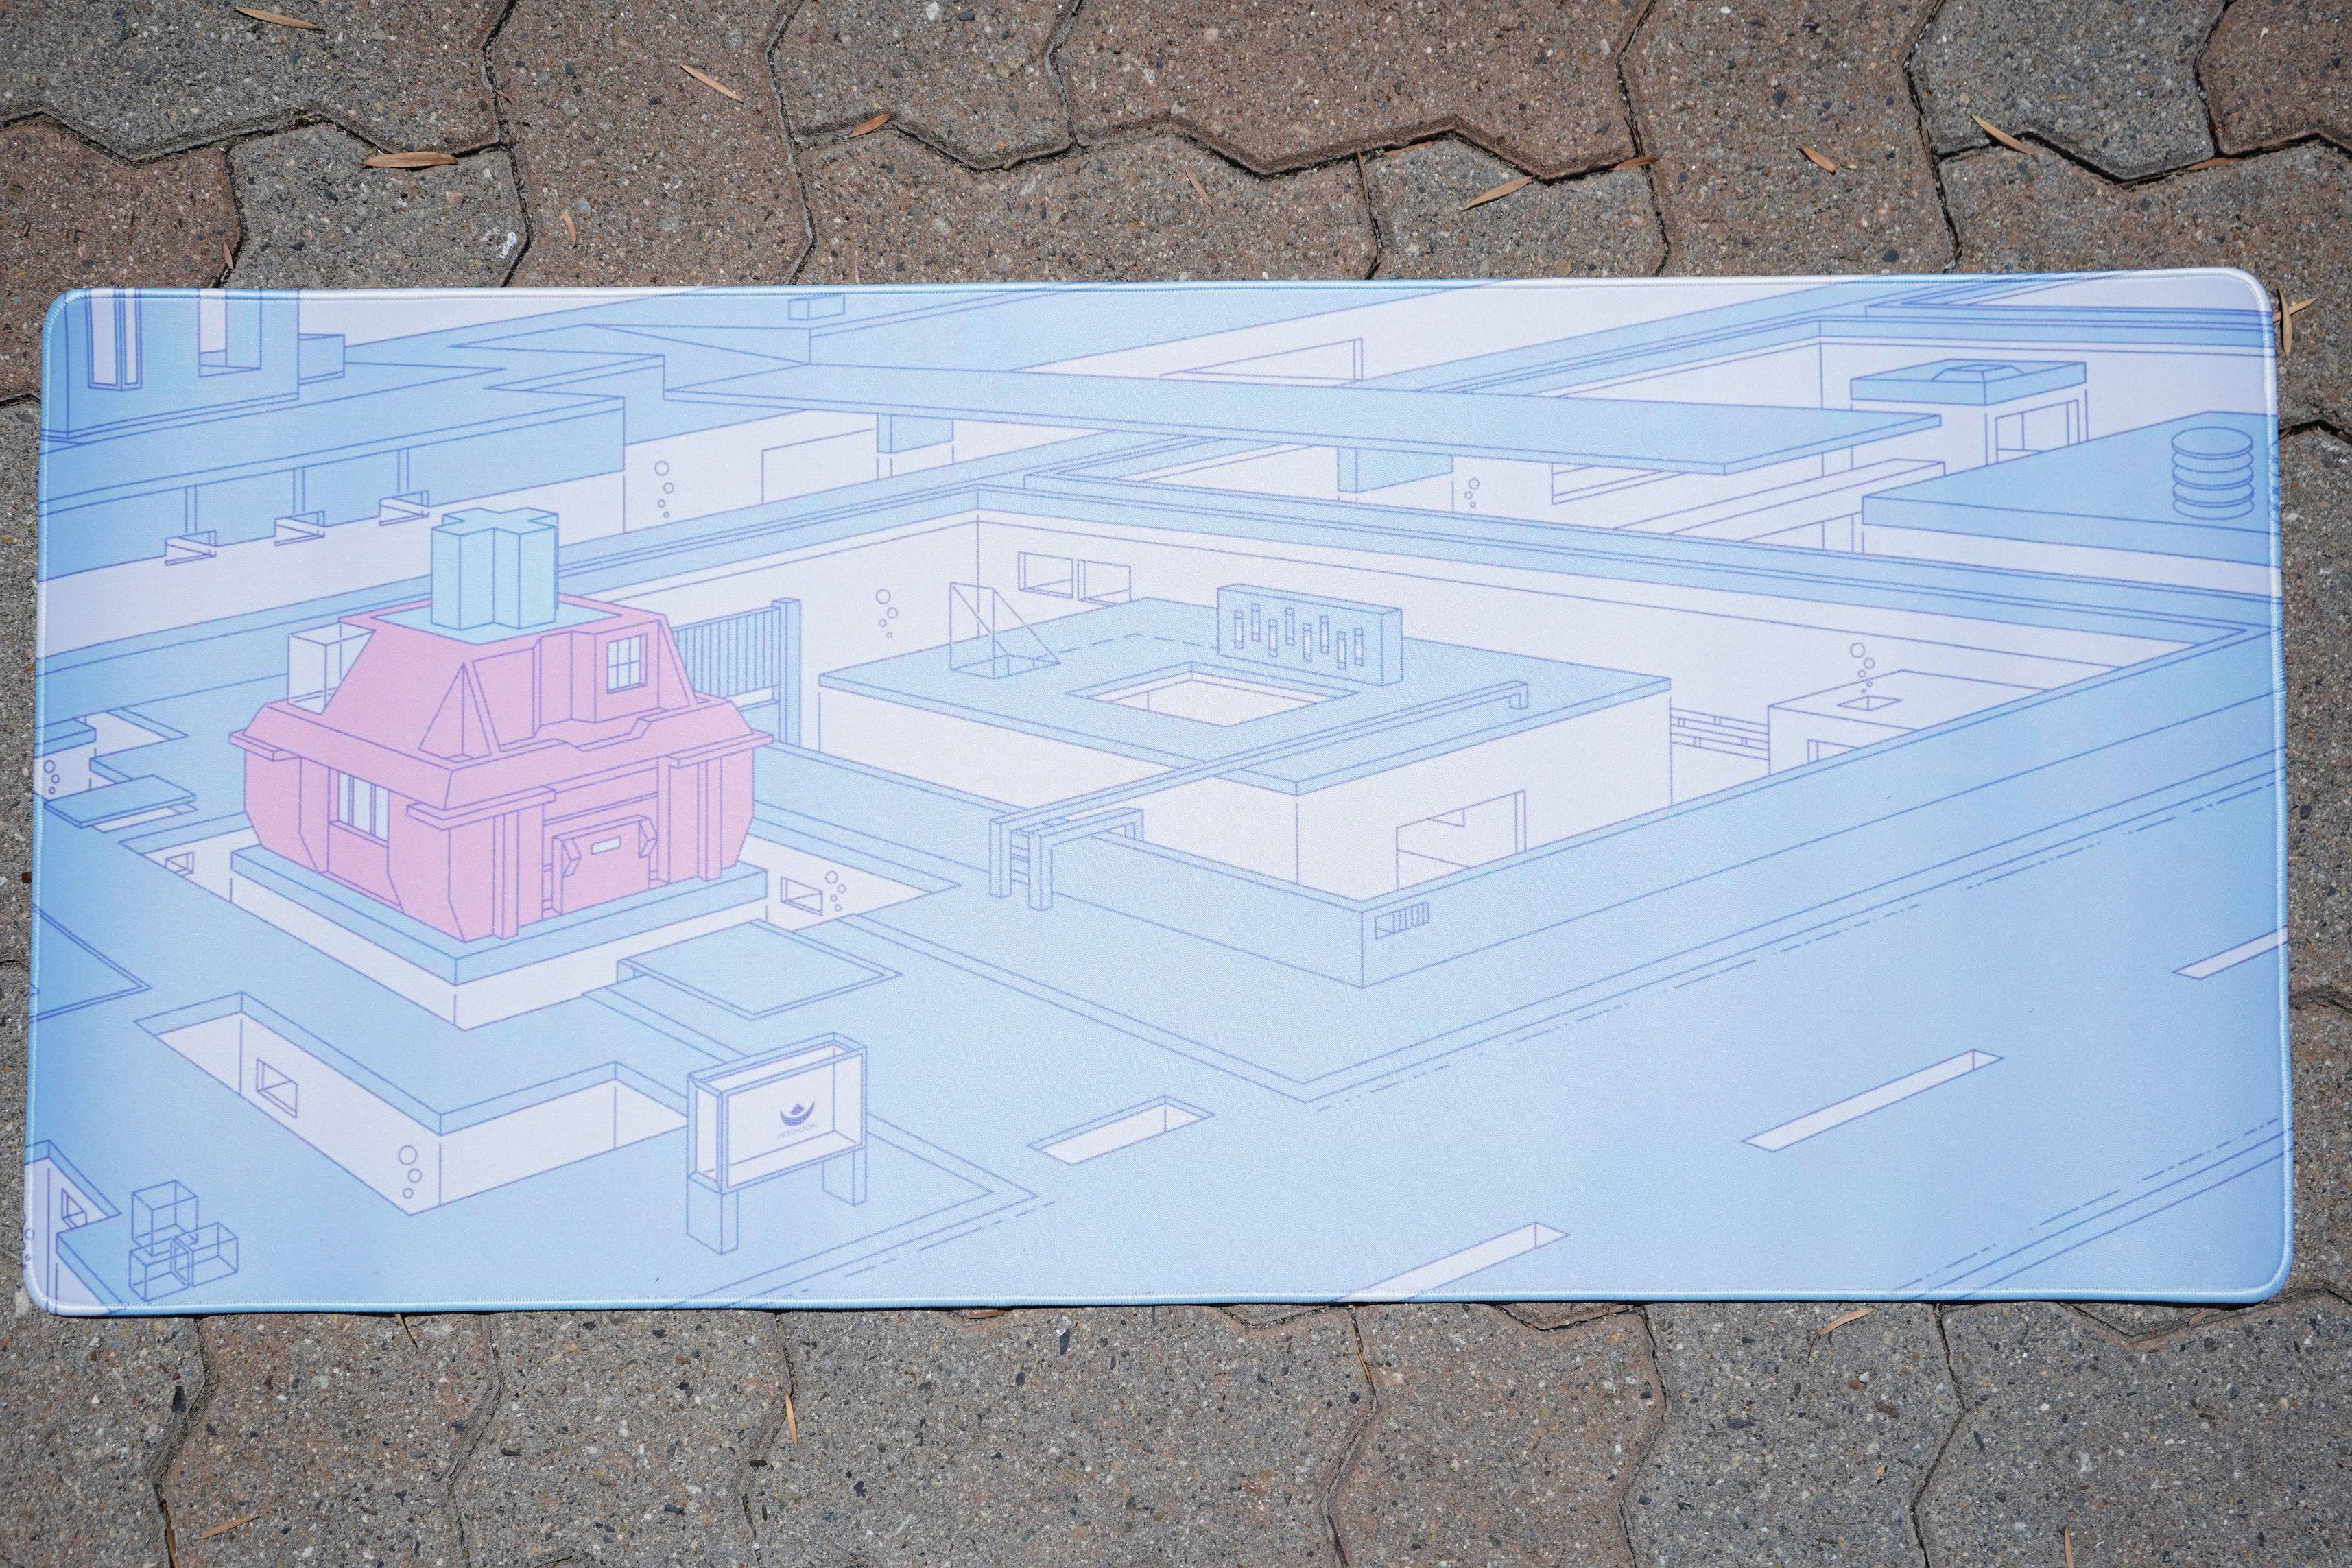 Chemical Plant Deskmat - KeebsForAll